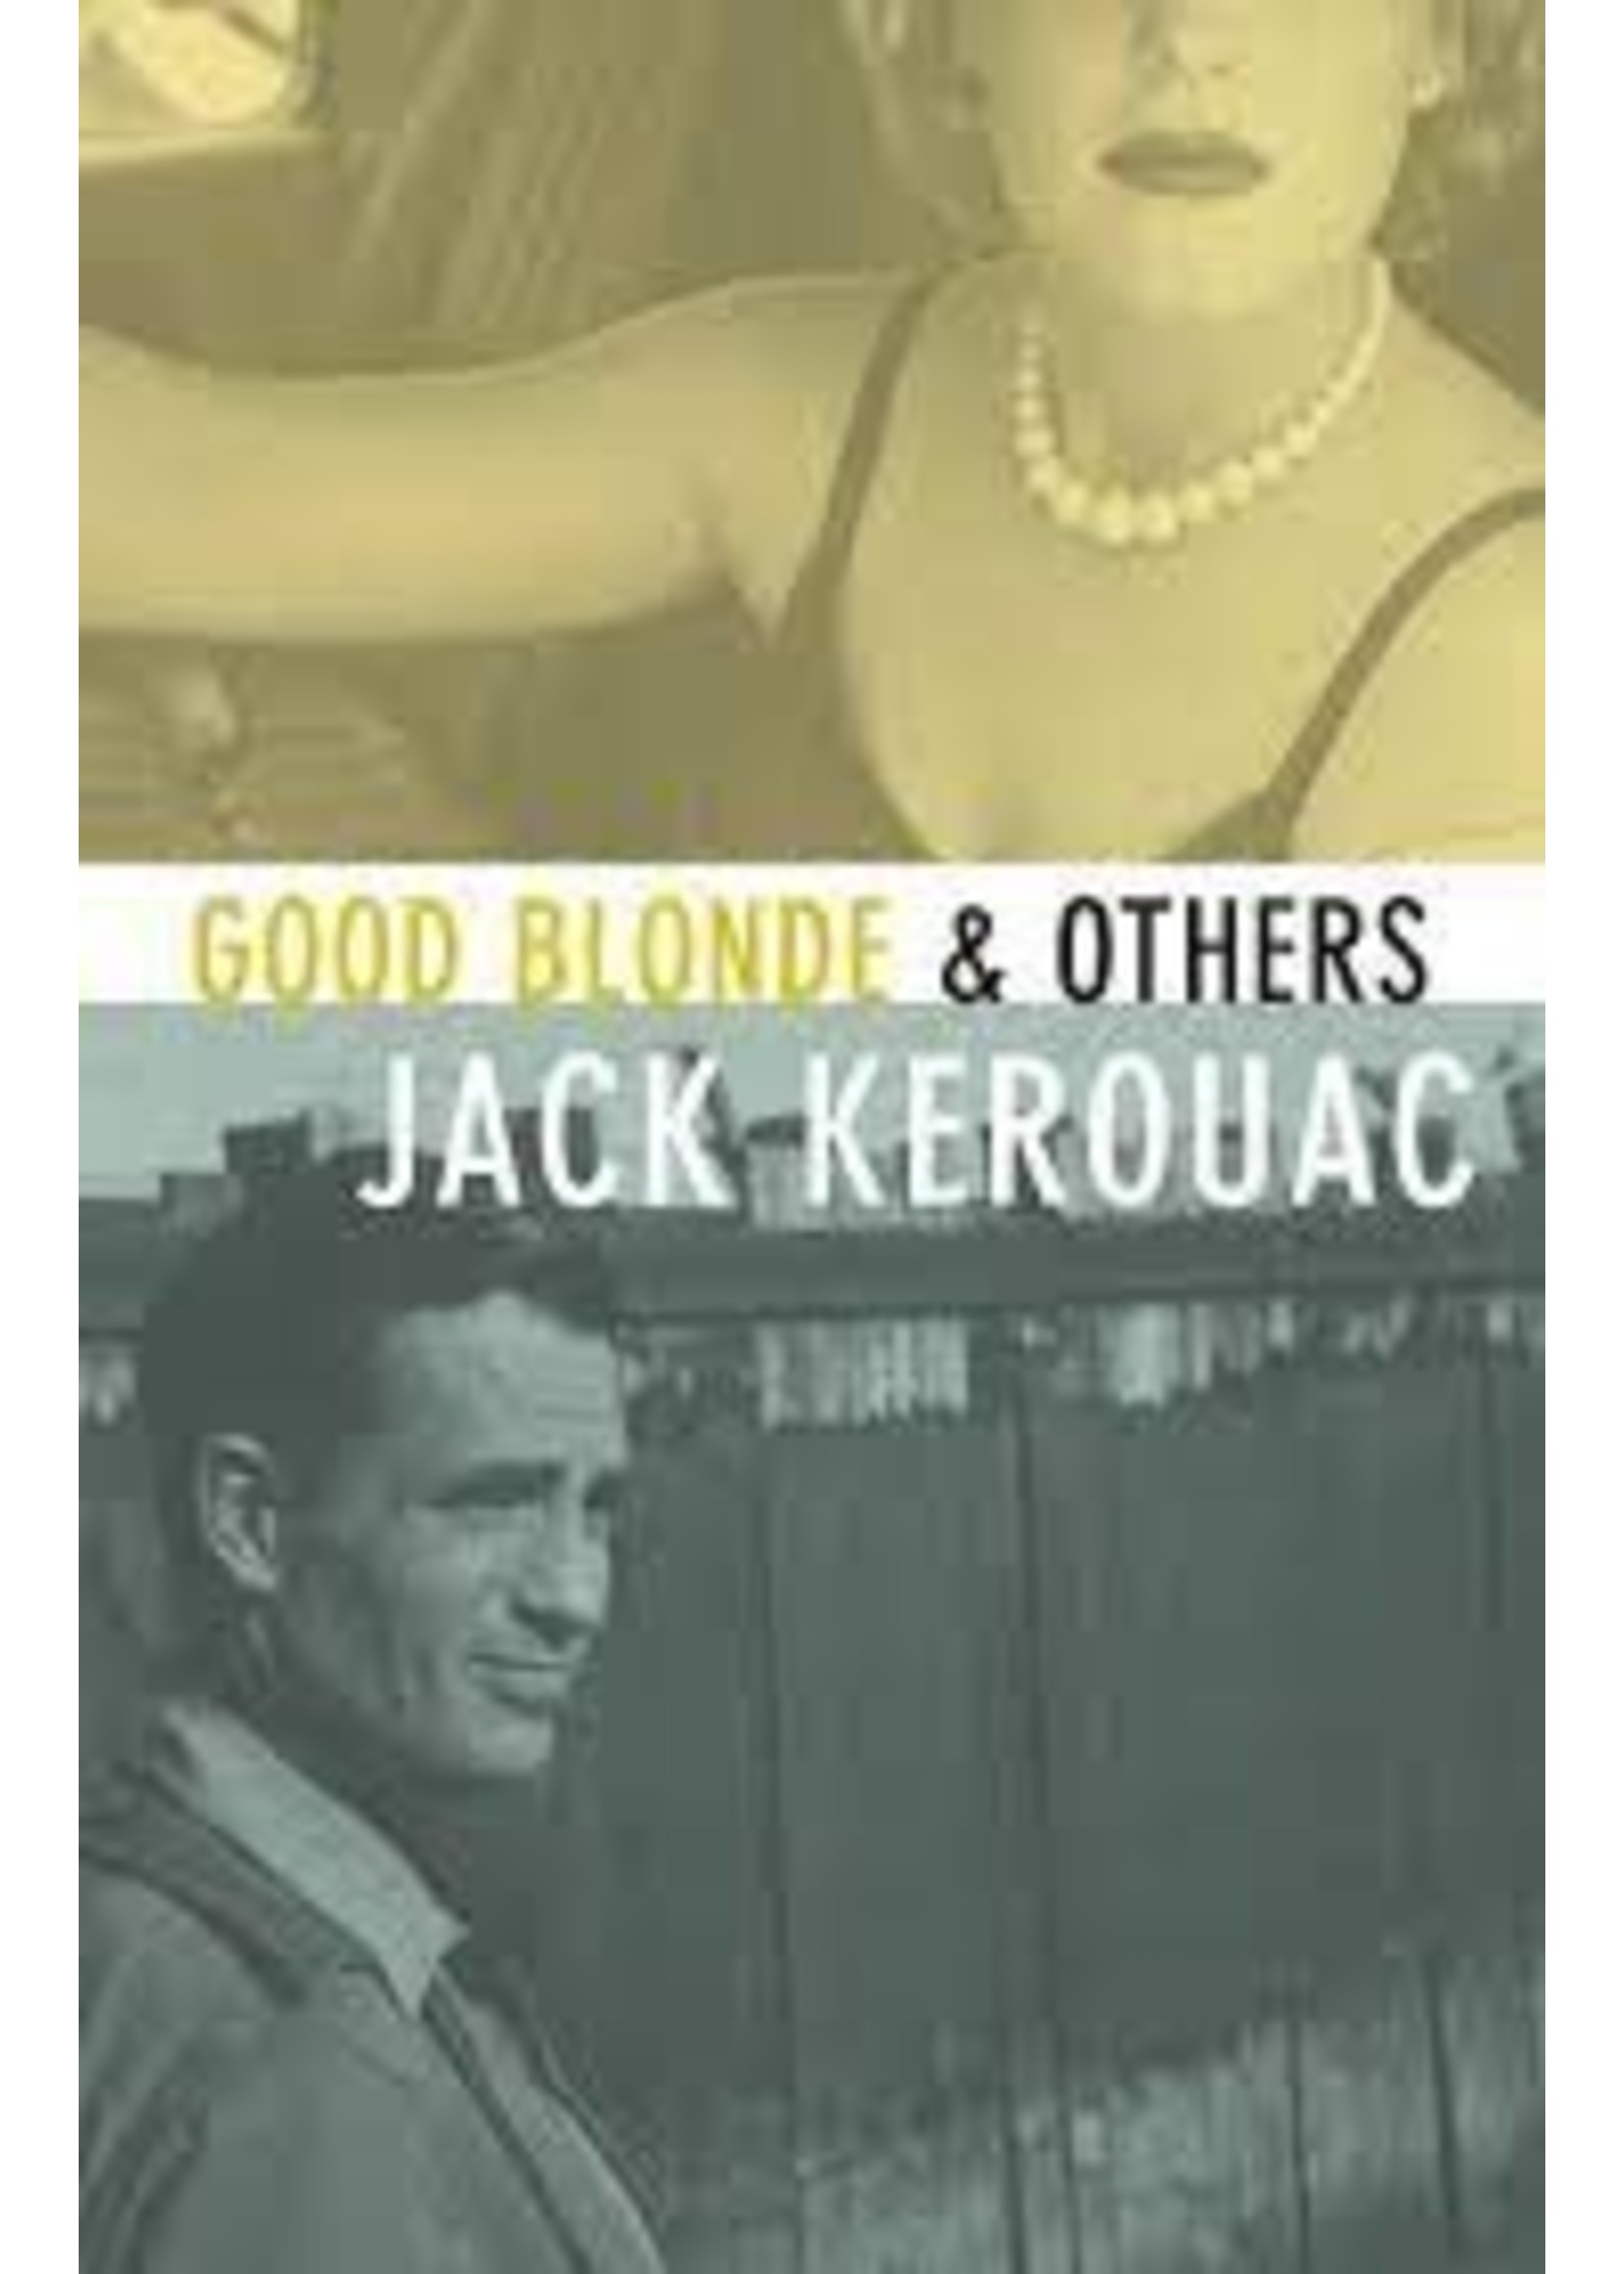 Good Blond & Others by Jack Kerouac